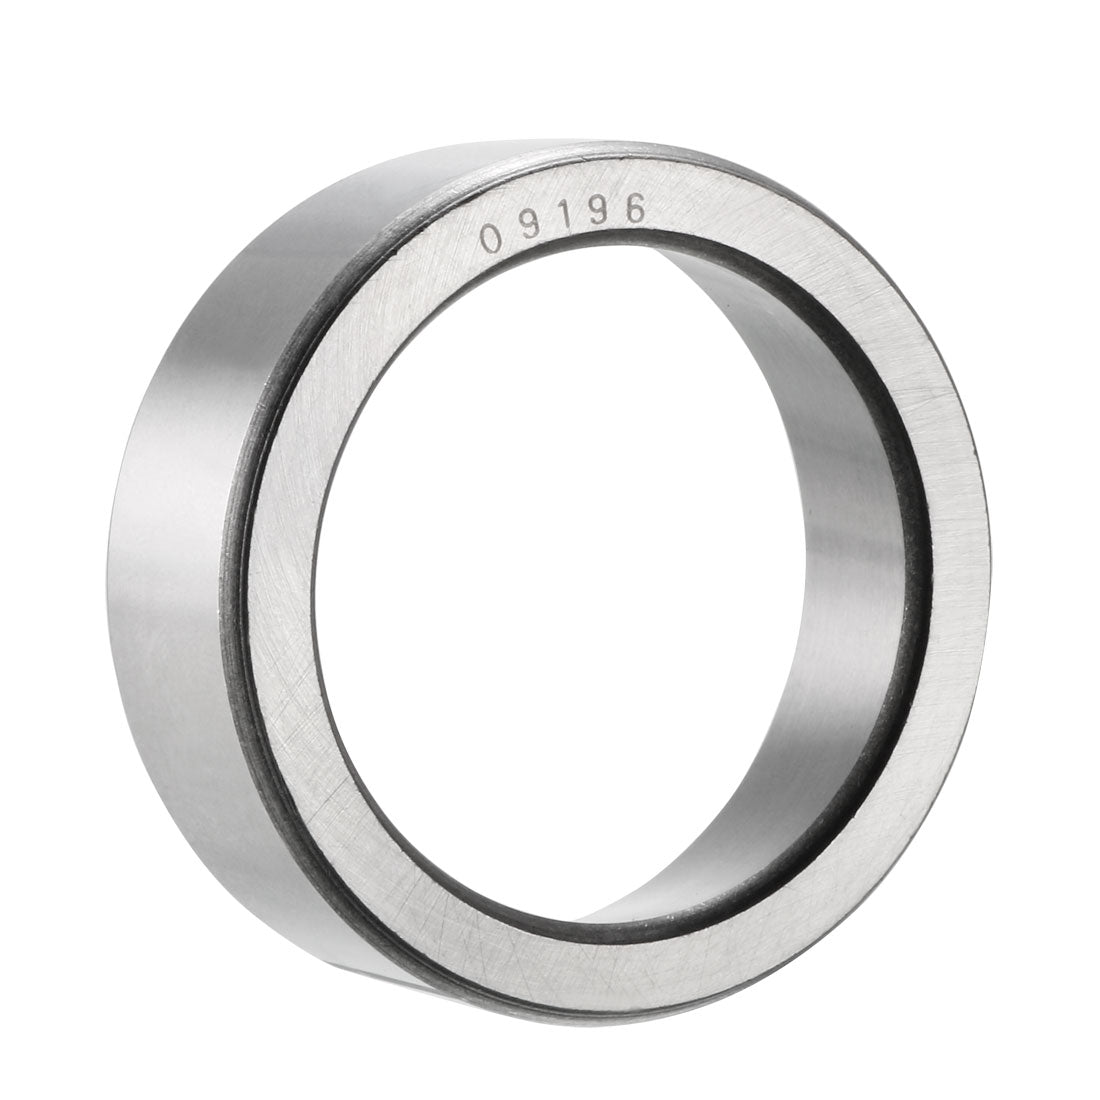 uxcell Uxcell 09196 Tapered Roller Bearing Outer Race Cup 1.938" O.D., 0.6875" Width